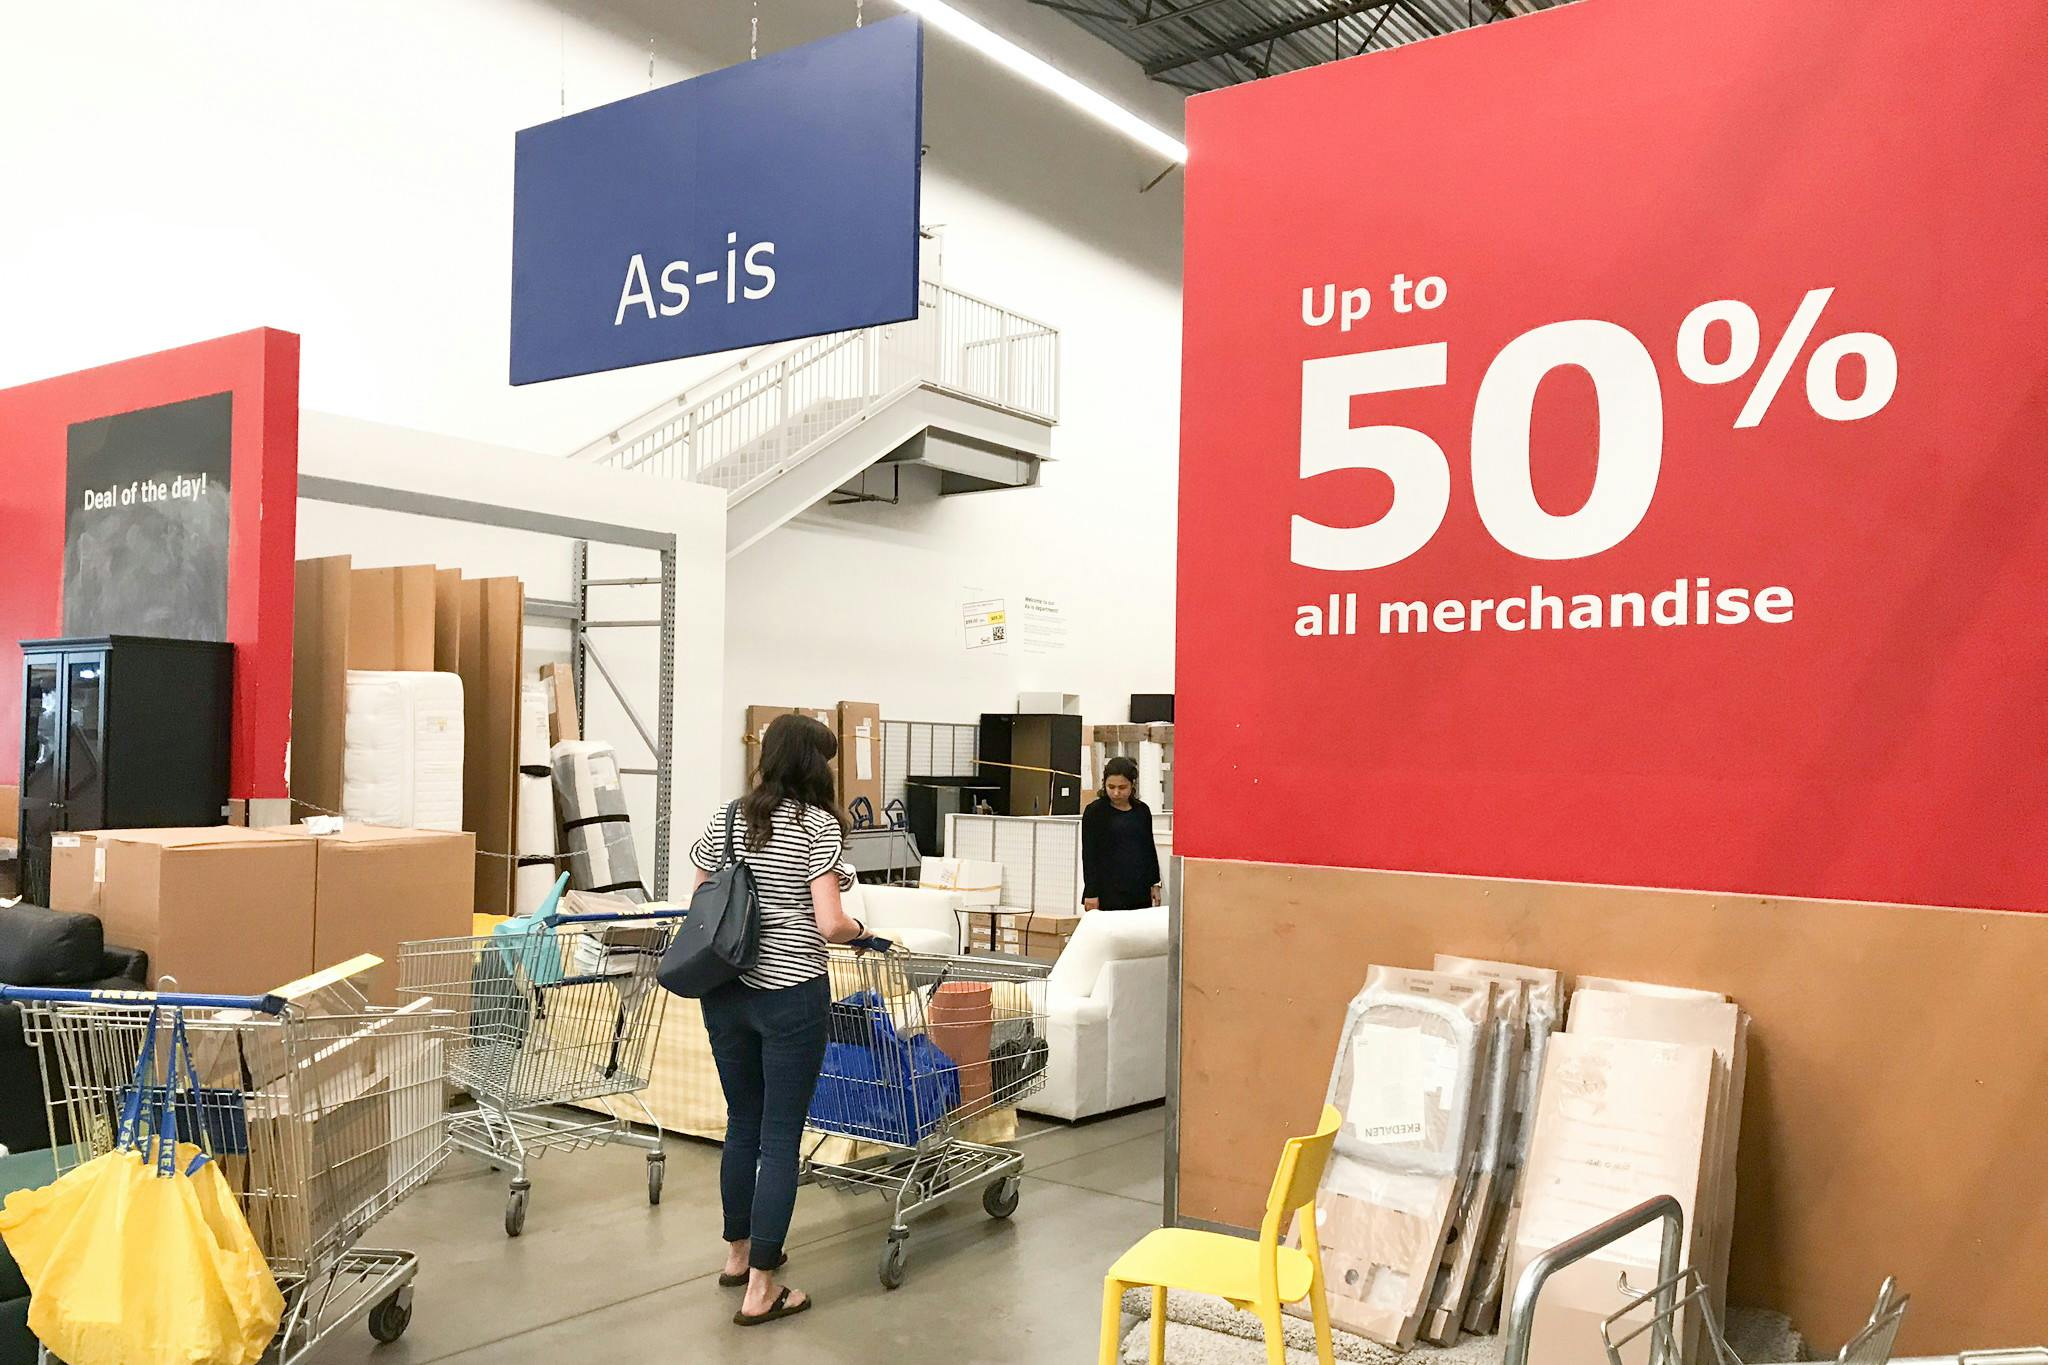 Find the best deals in the "As-is" section at IKEA.